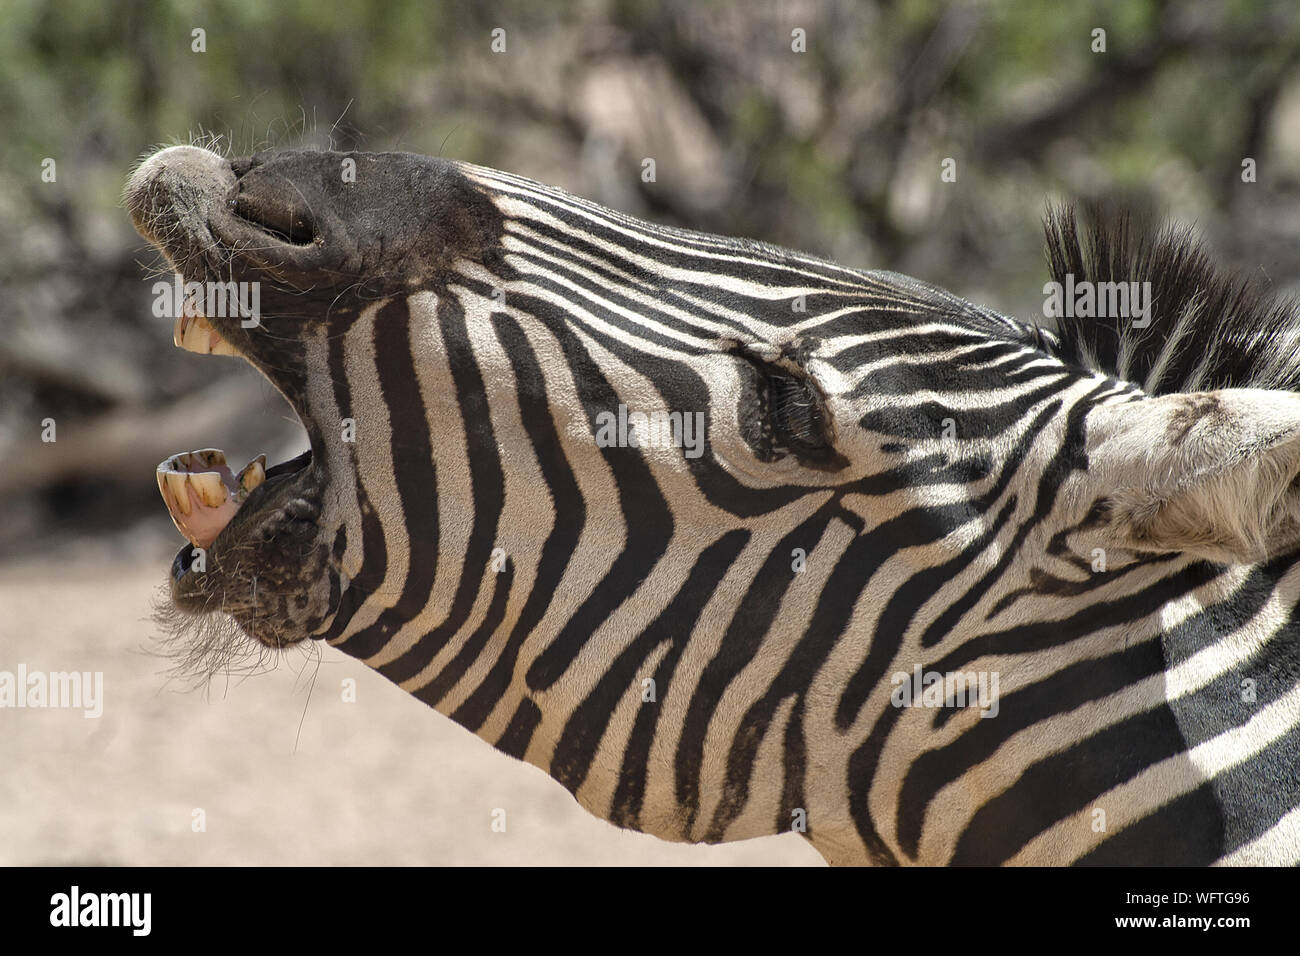 Grant’s Zebra. Closeup of head with mouth open and barking and looking to the left.Teeth showing. Stock Photo